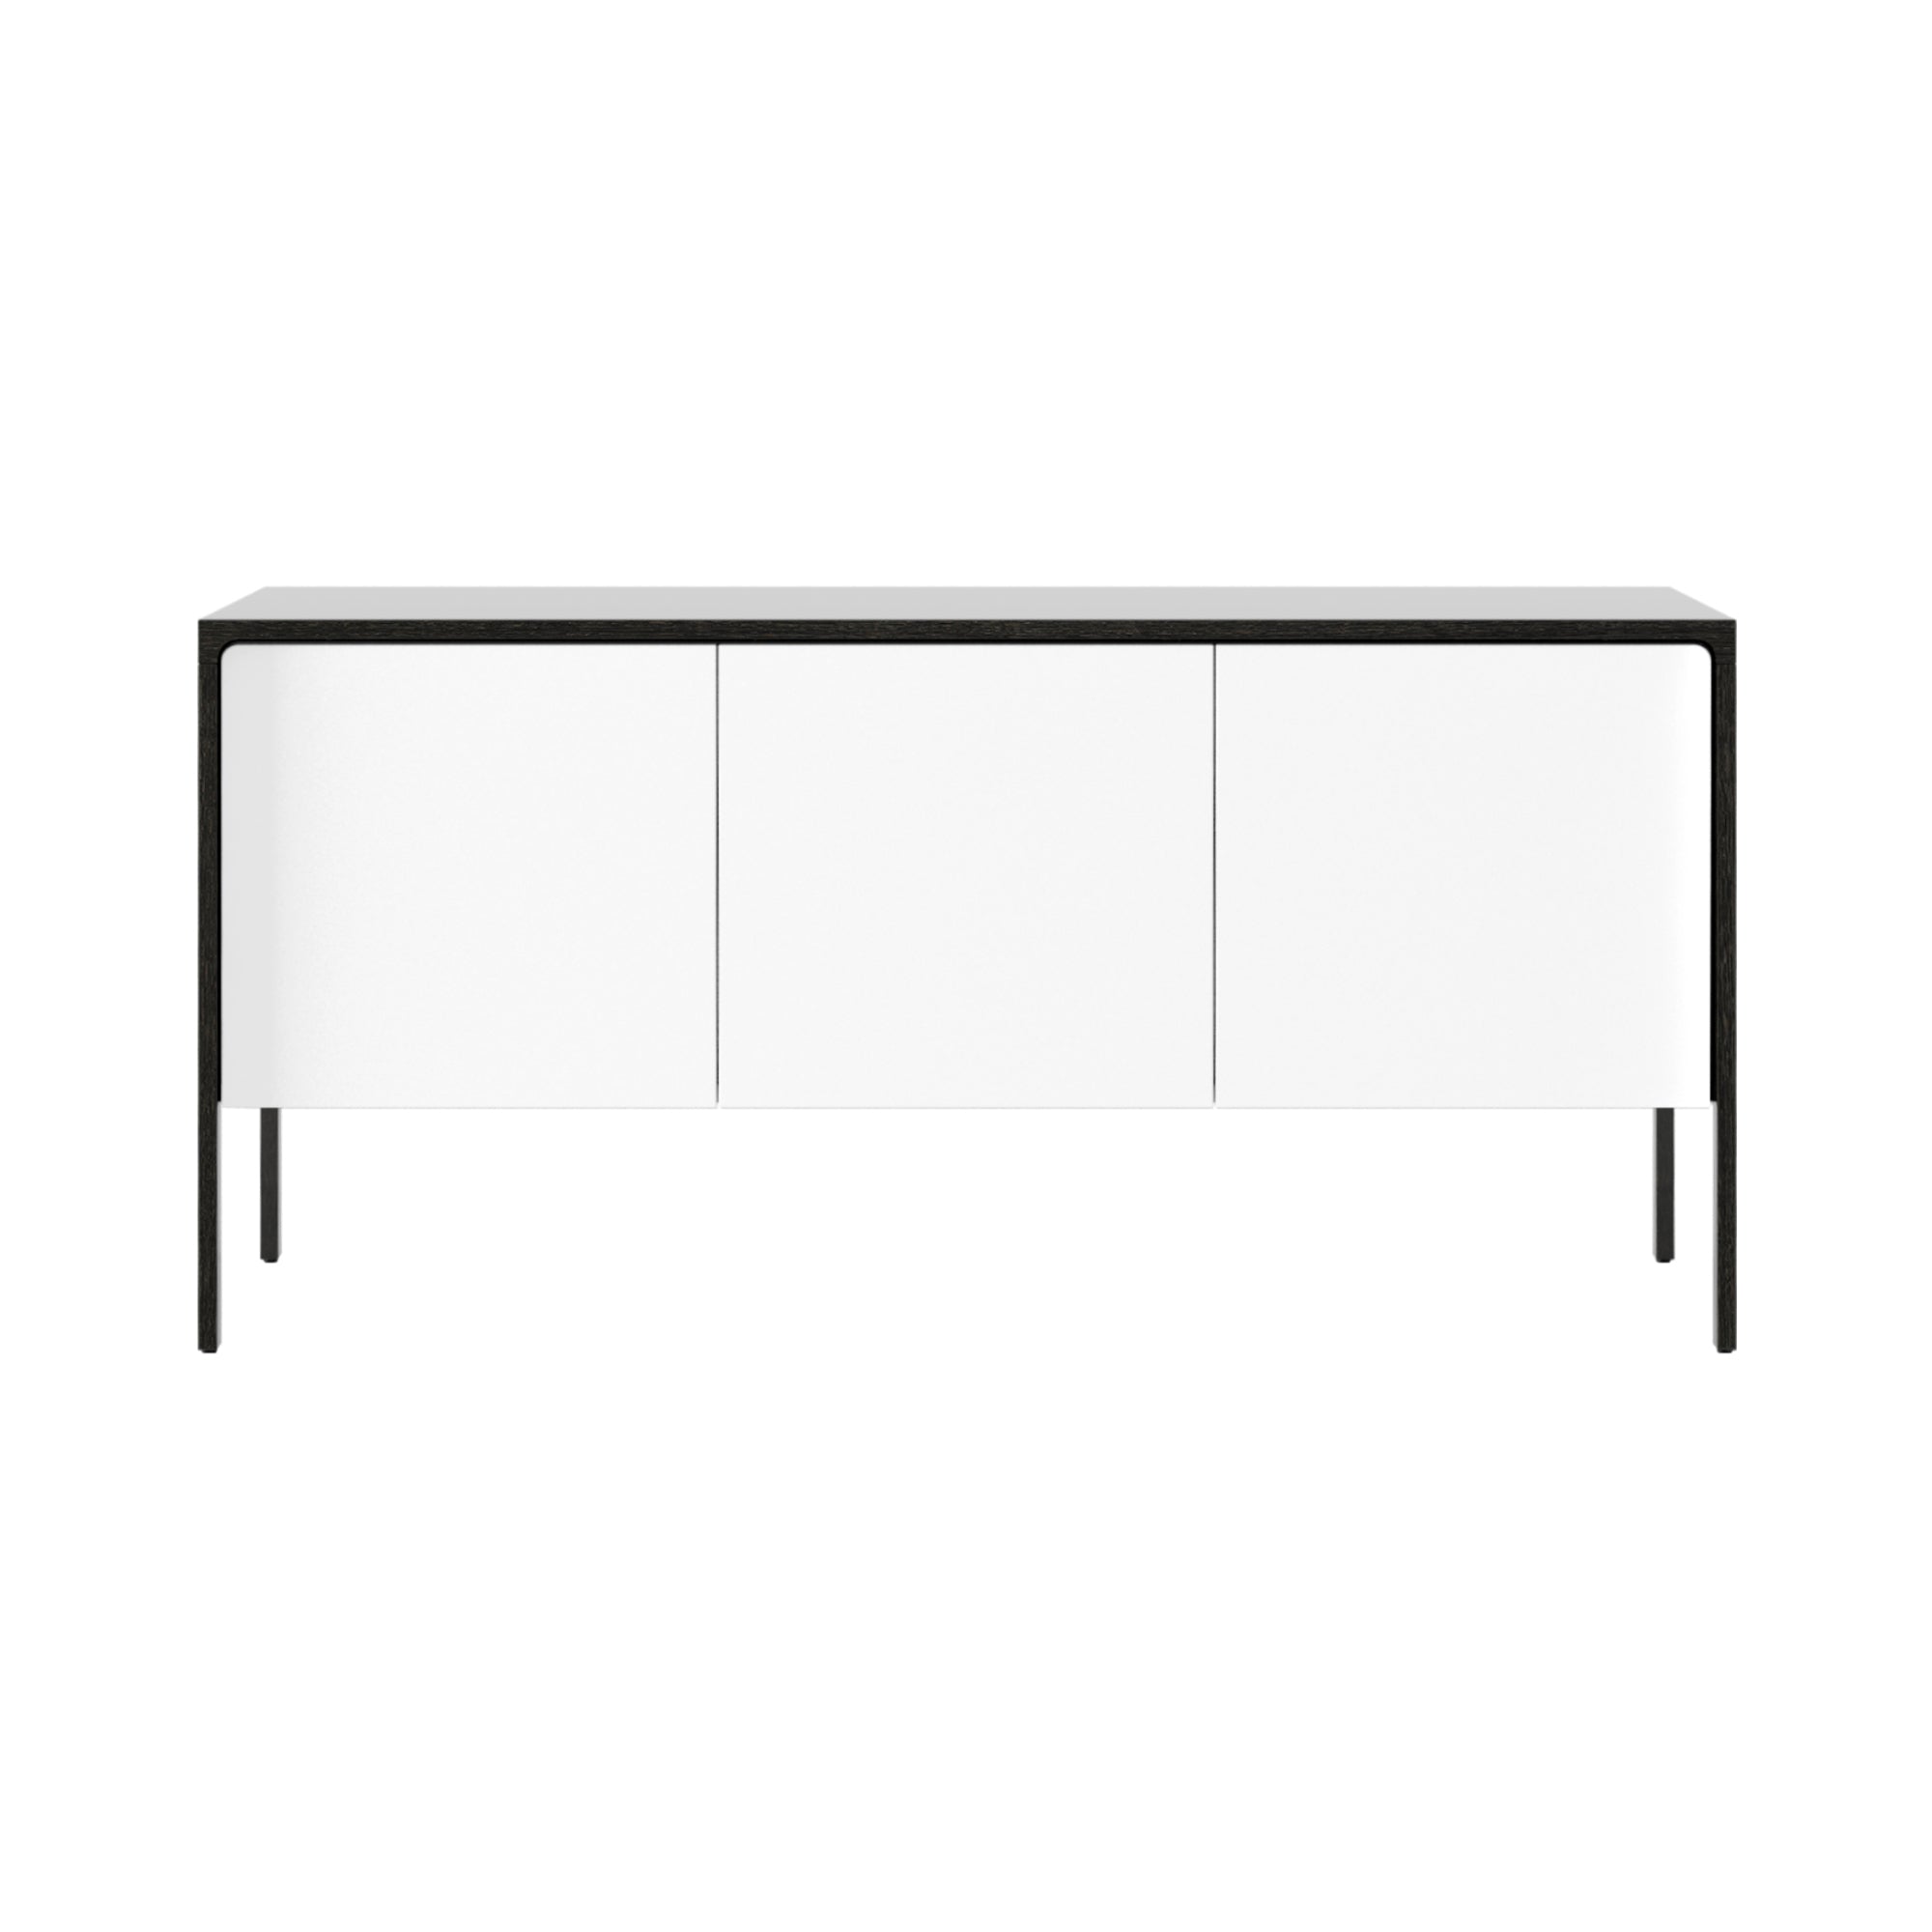 Tactile Sideboard: TAC210 + White Texturised Lacquered + Dark Grey Stained Oak